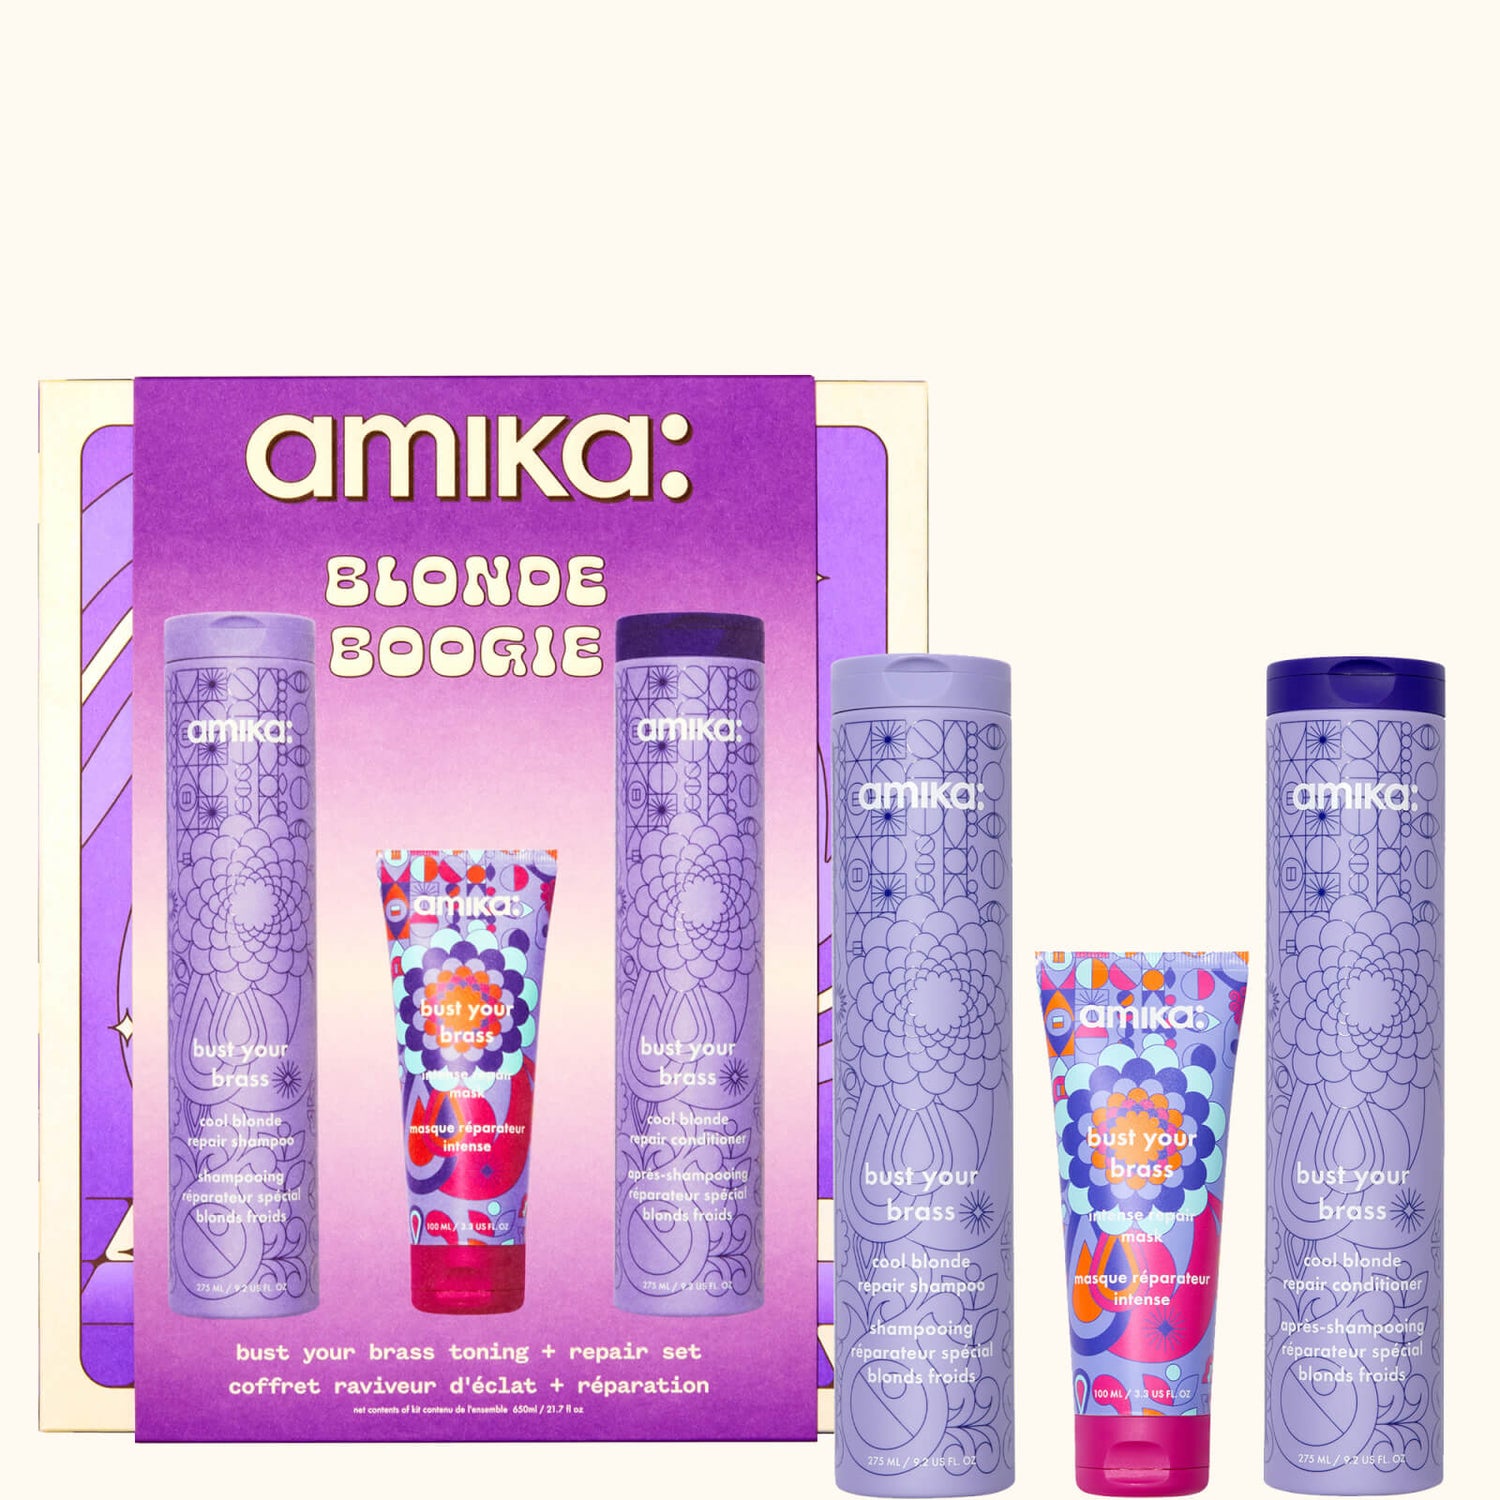 Amika Blonde Boogie Bust Your Brass Toning and Repair Set